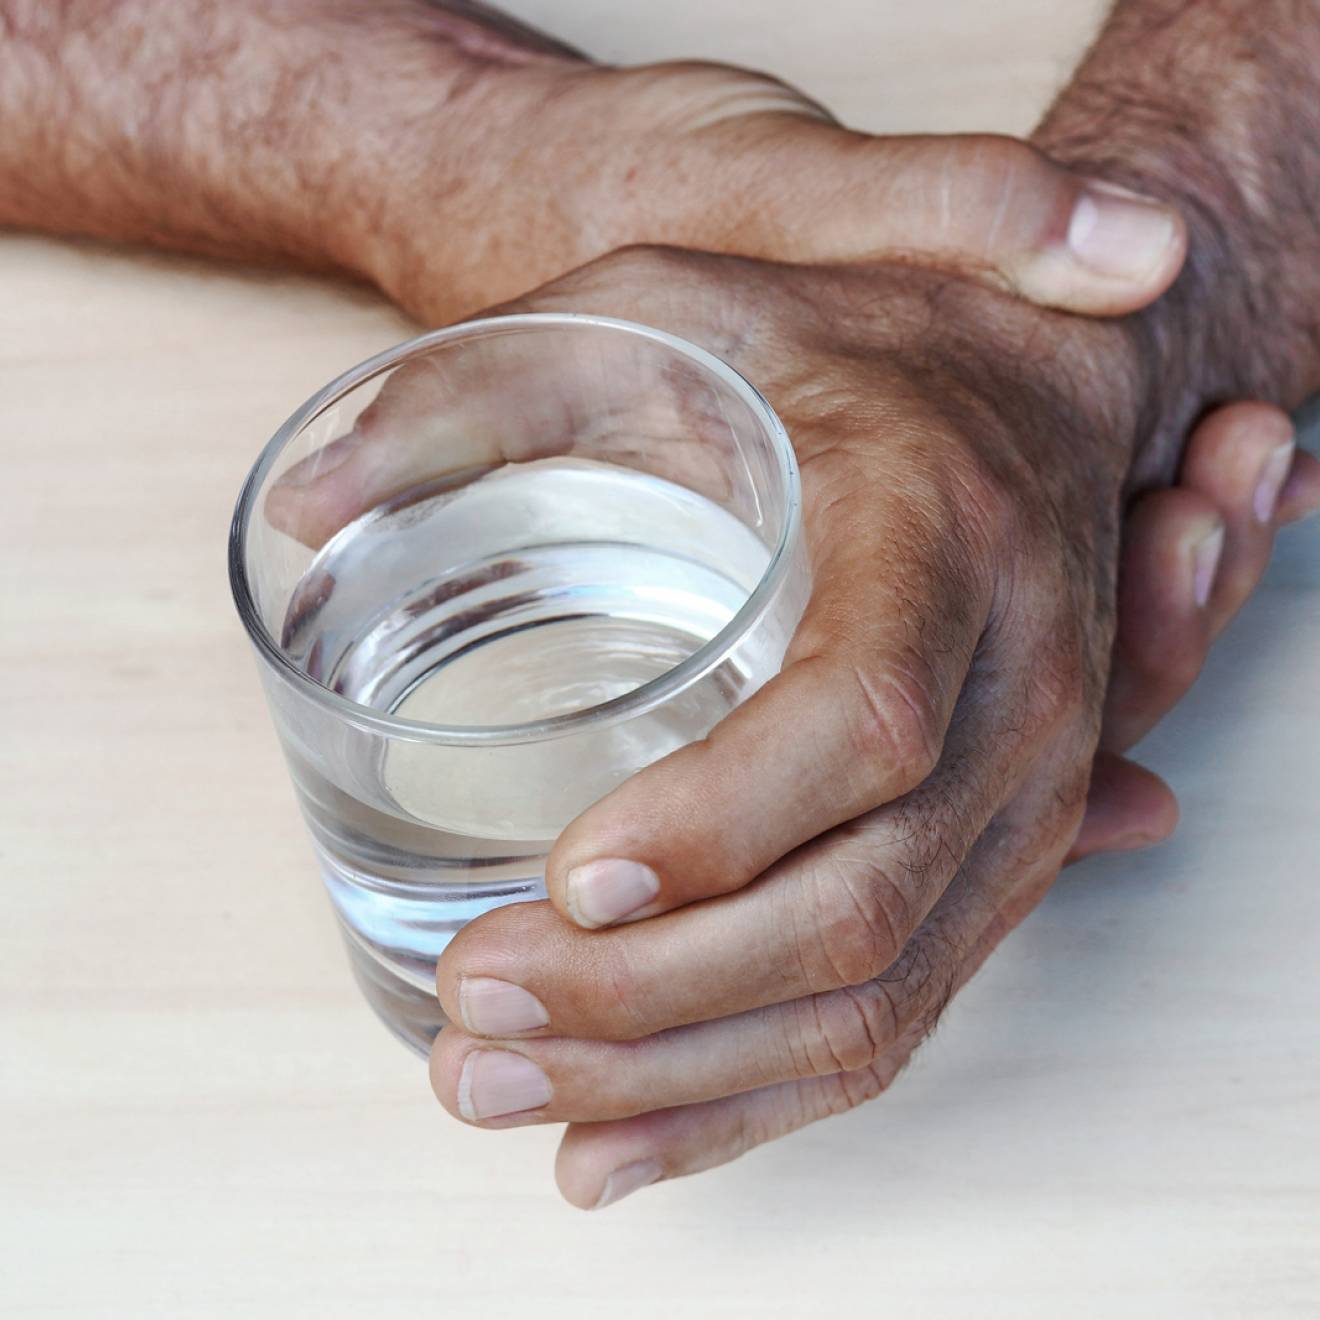 A man steadying a hand holding a glass of water with his other hand